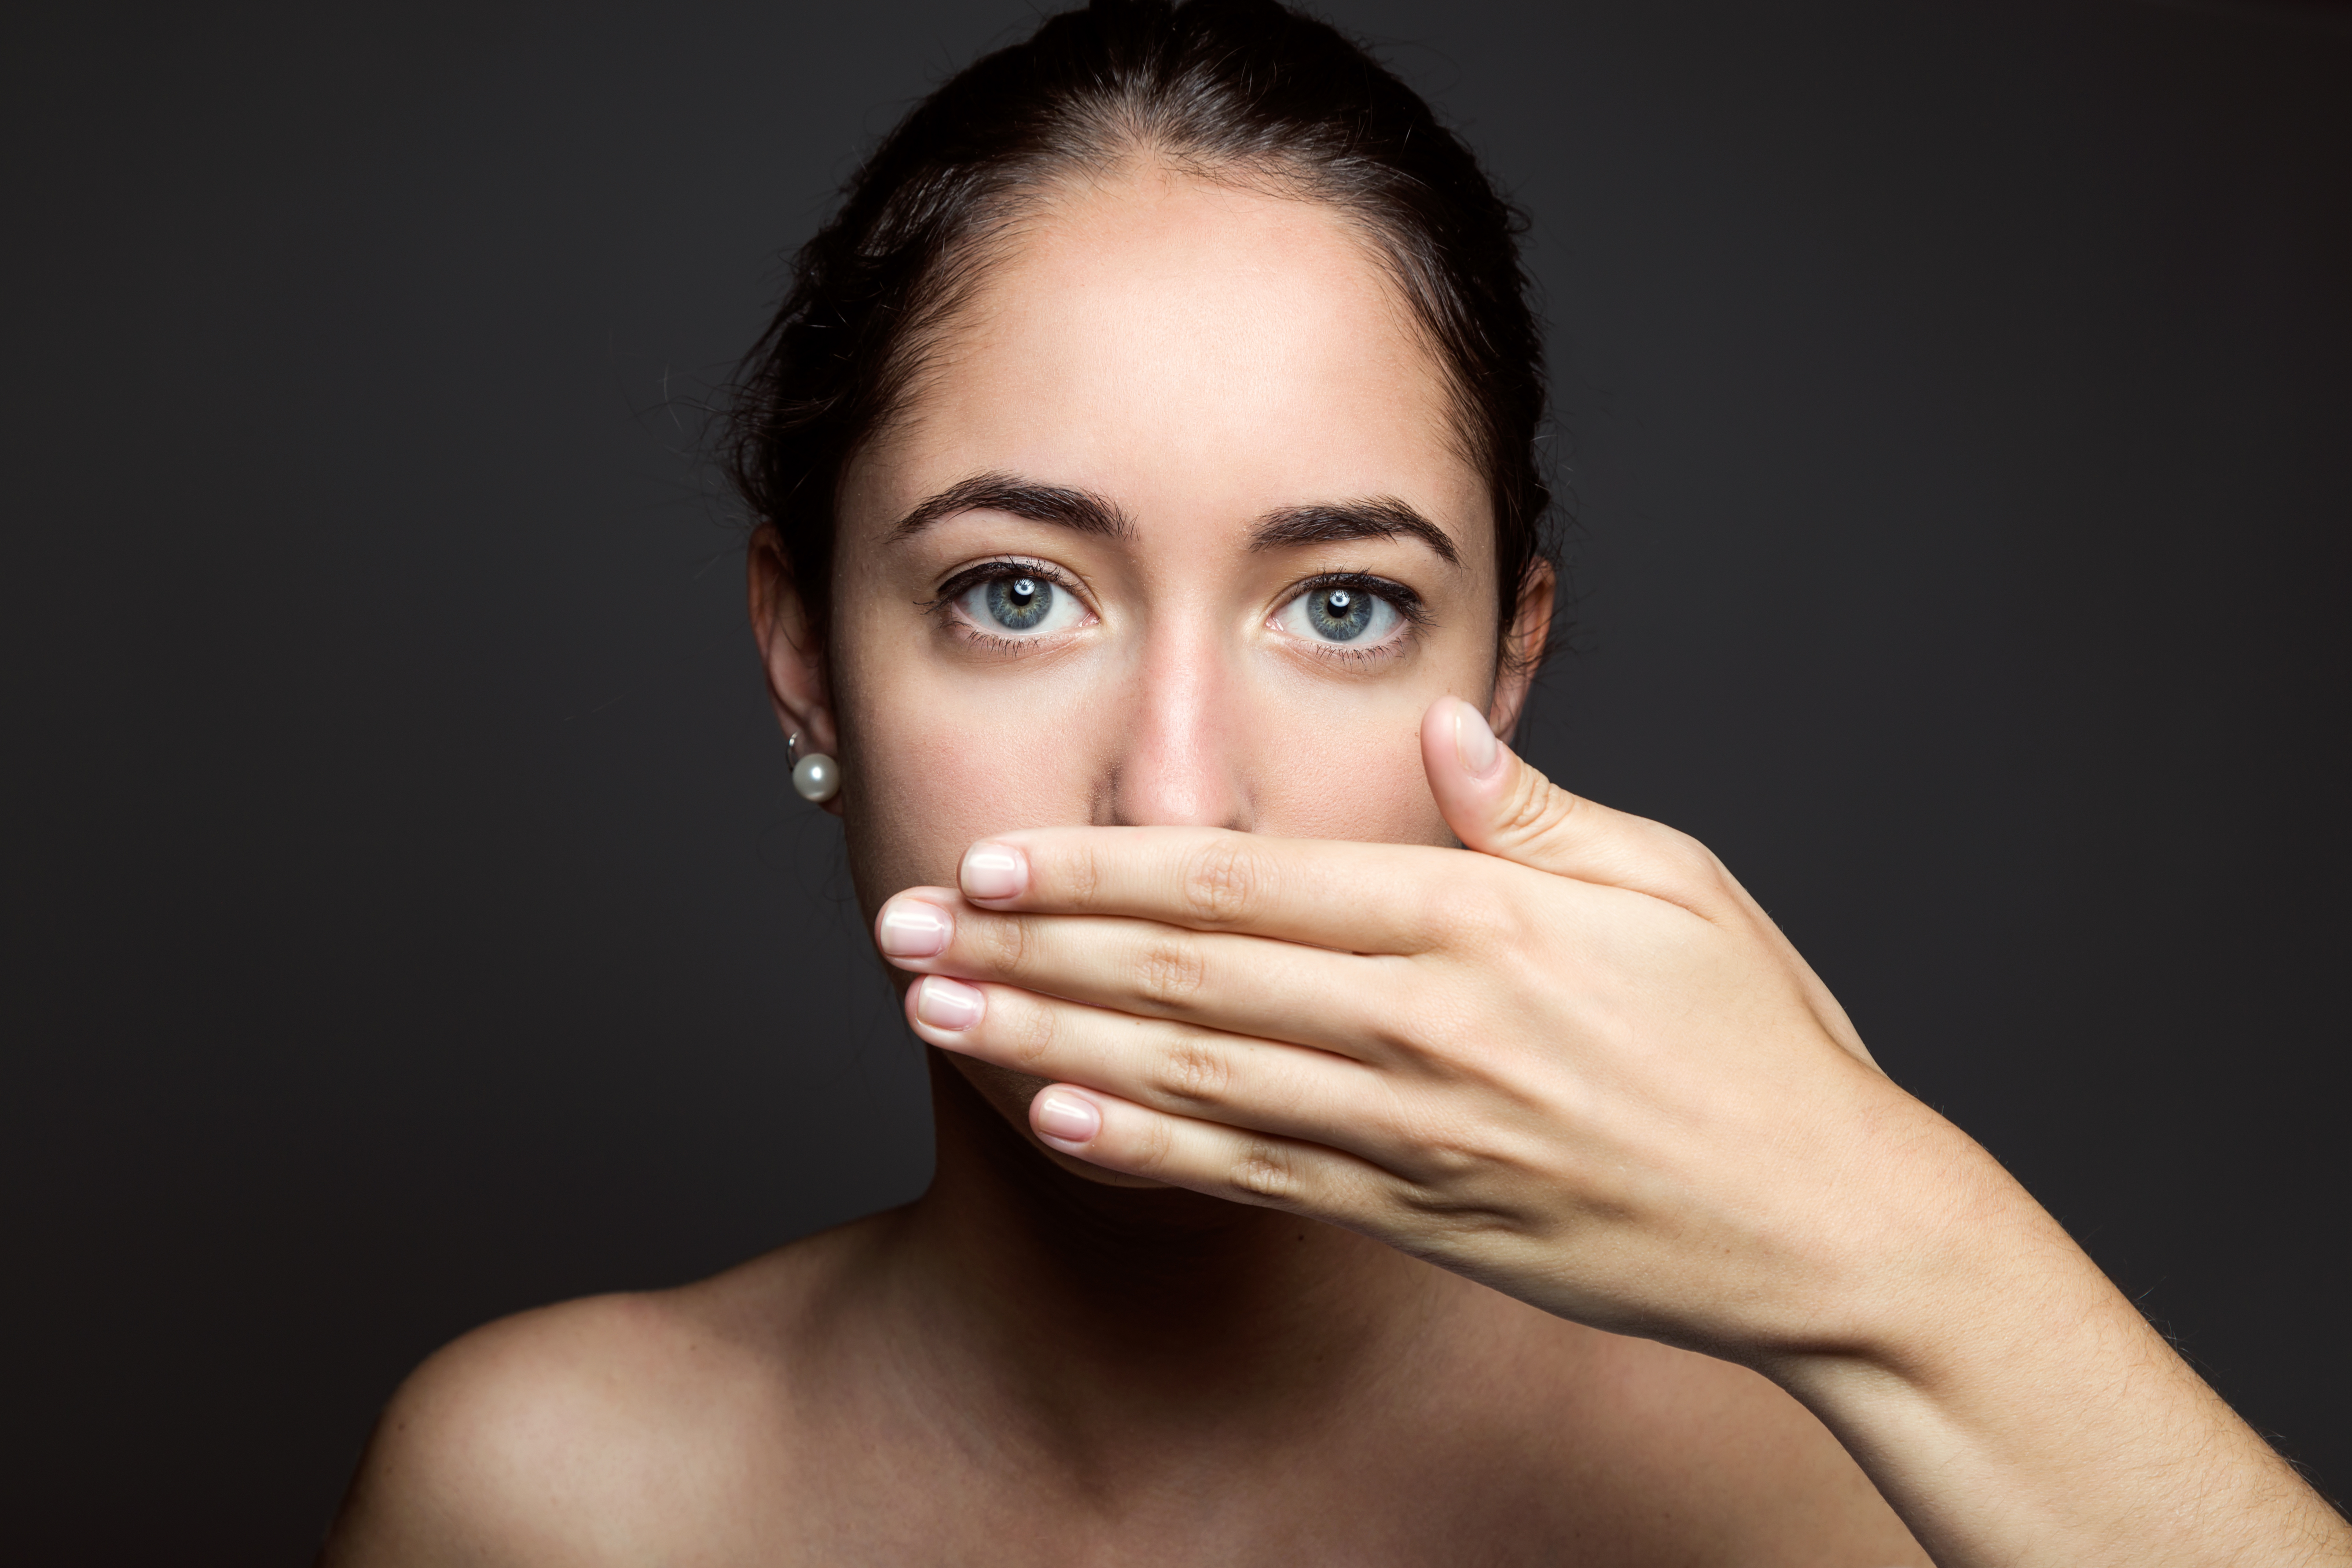 Portrait Of Beautiful Young Woman Covering Her Mouth With Hand. Isolated.